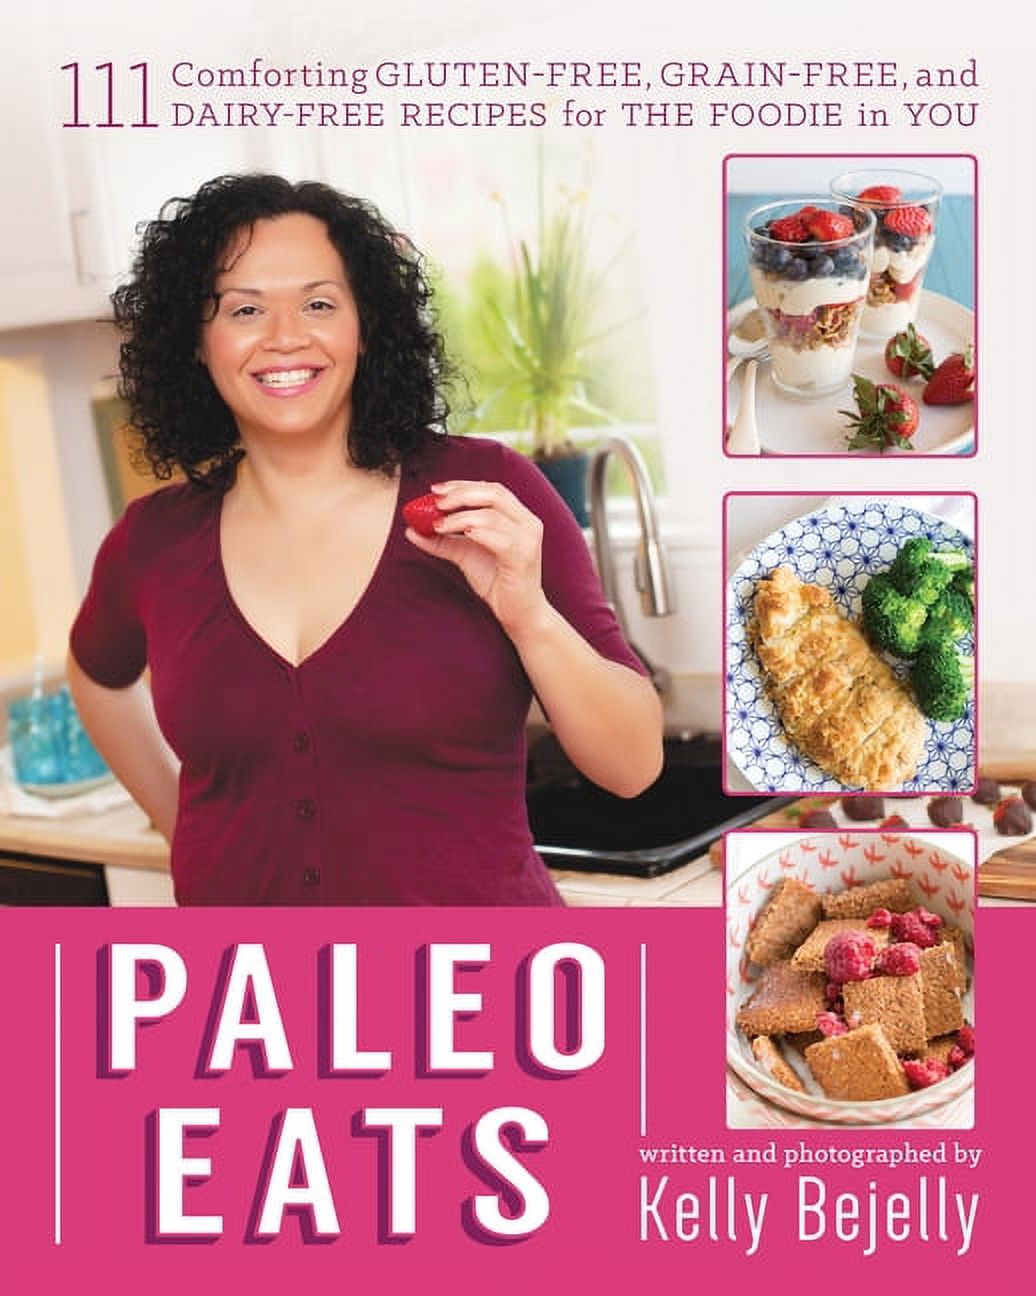 Paleo Eats : 111 Comforting Gluten-Free, Grain-Free and Dairy-Free Recipes for the Foodie in You (Paperback) - image 1 of 1